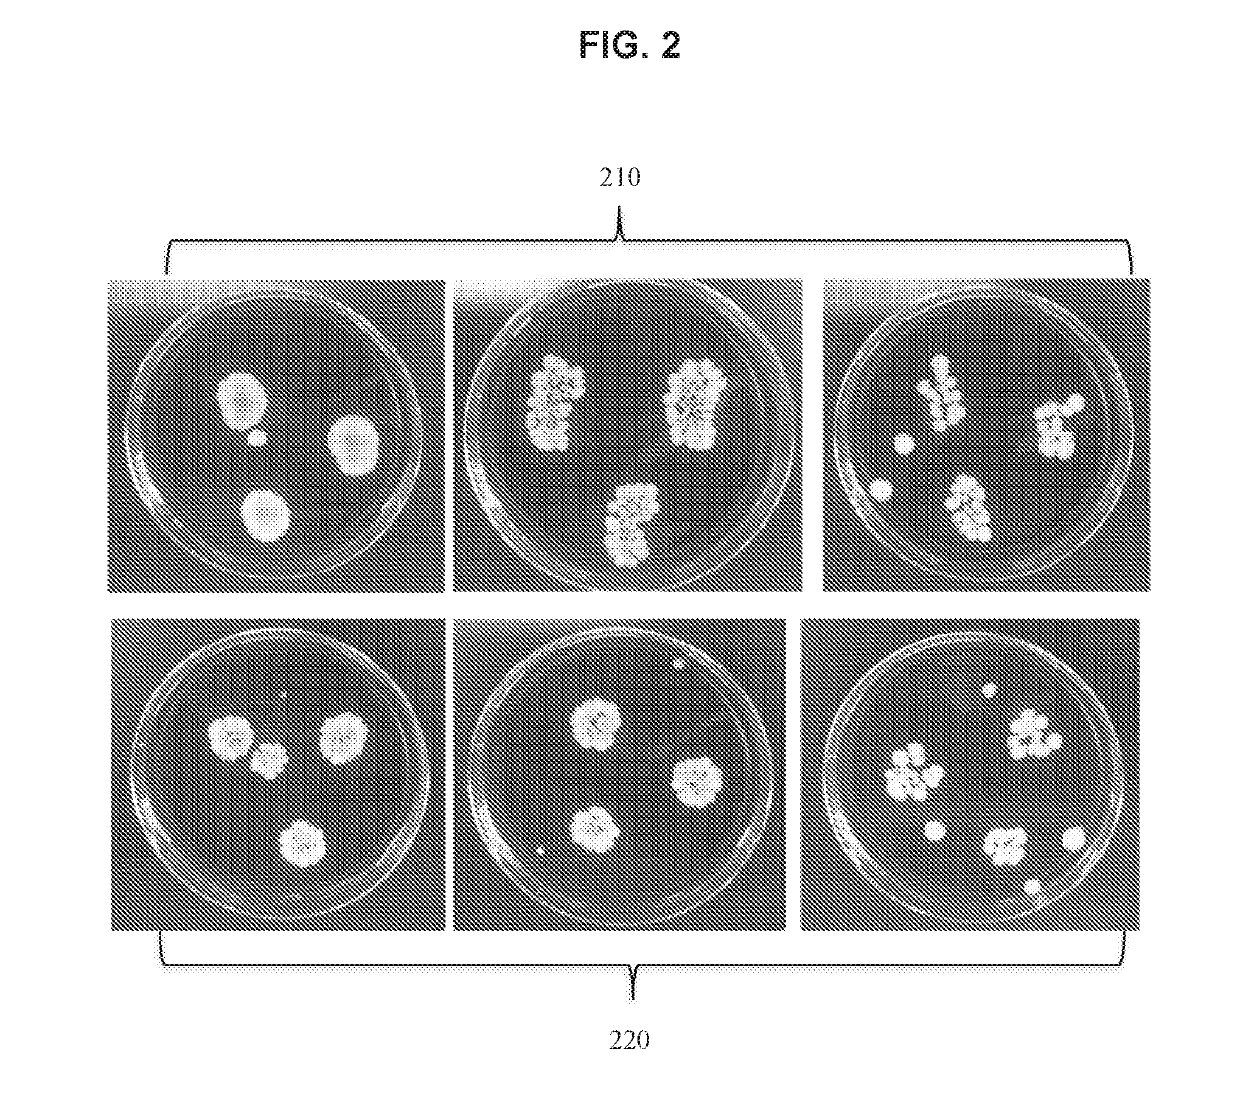 Spectroscopic systems and methods for the identification and quantification of pathogens